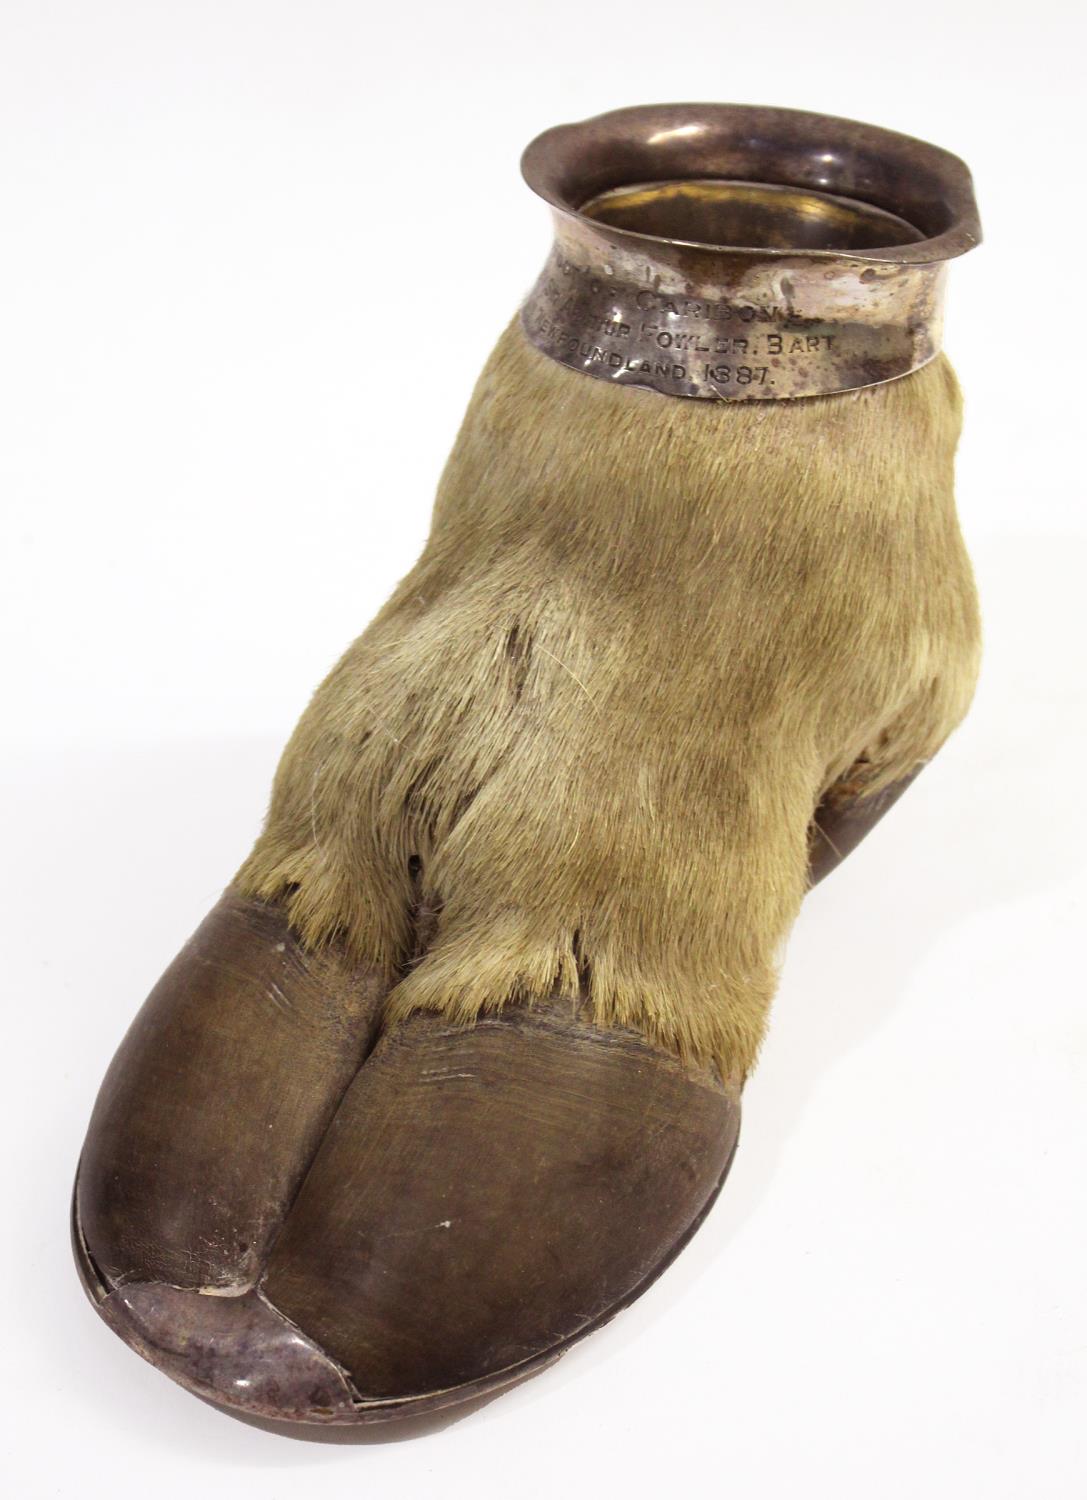 MOUNTED CARIBOU FOOT - NEWFOUNDLAND, 1887 - RAILWAY INTEREST a Caribou foot mounted in silver or